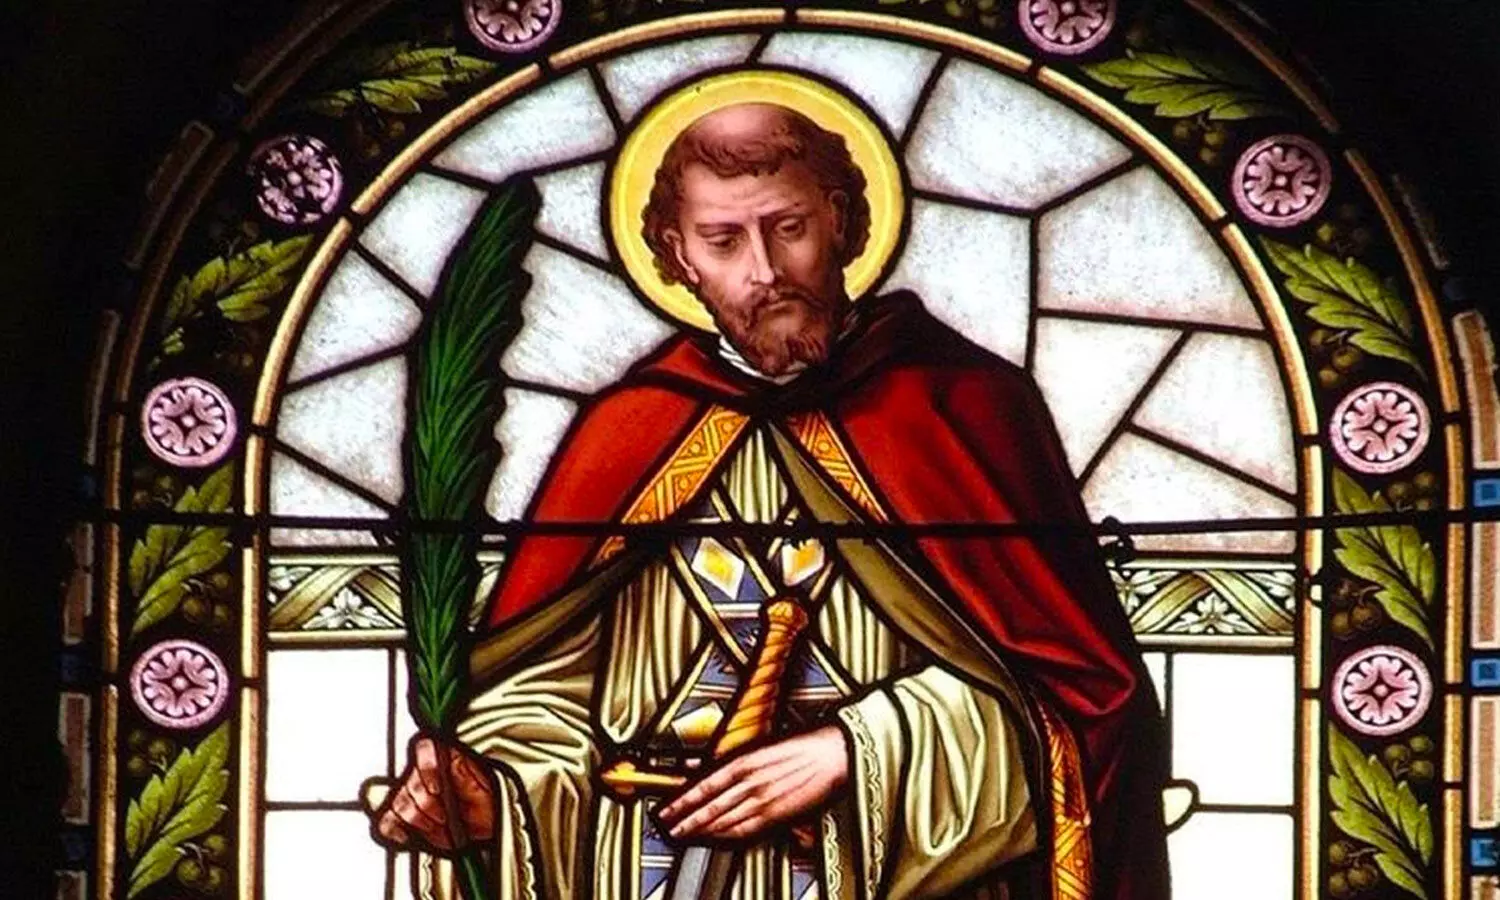 Saint Valentine—who was he, and what is the history of Valentines Day?